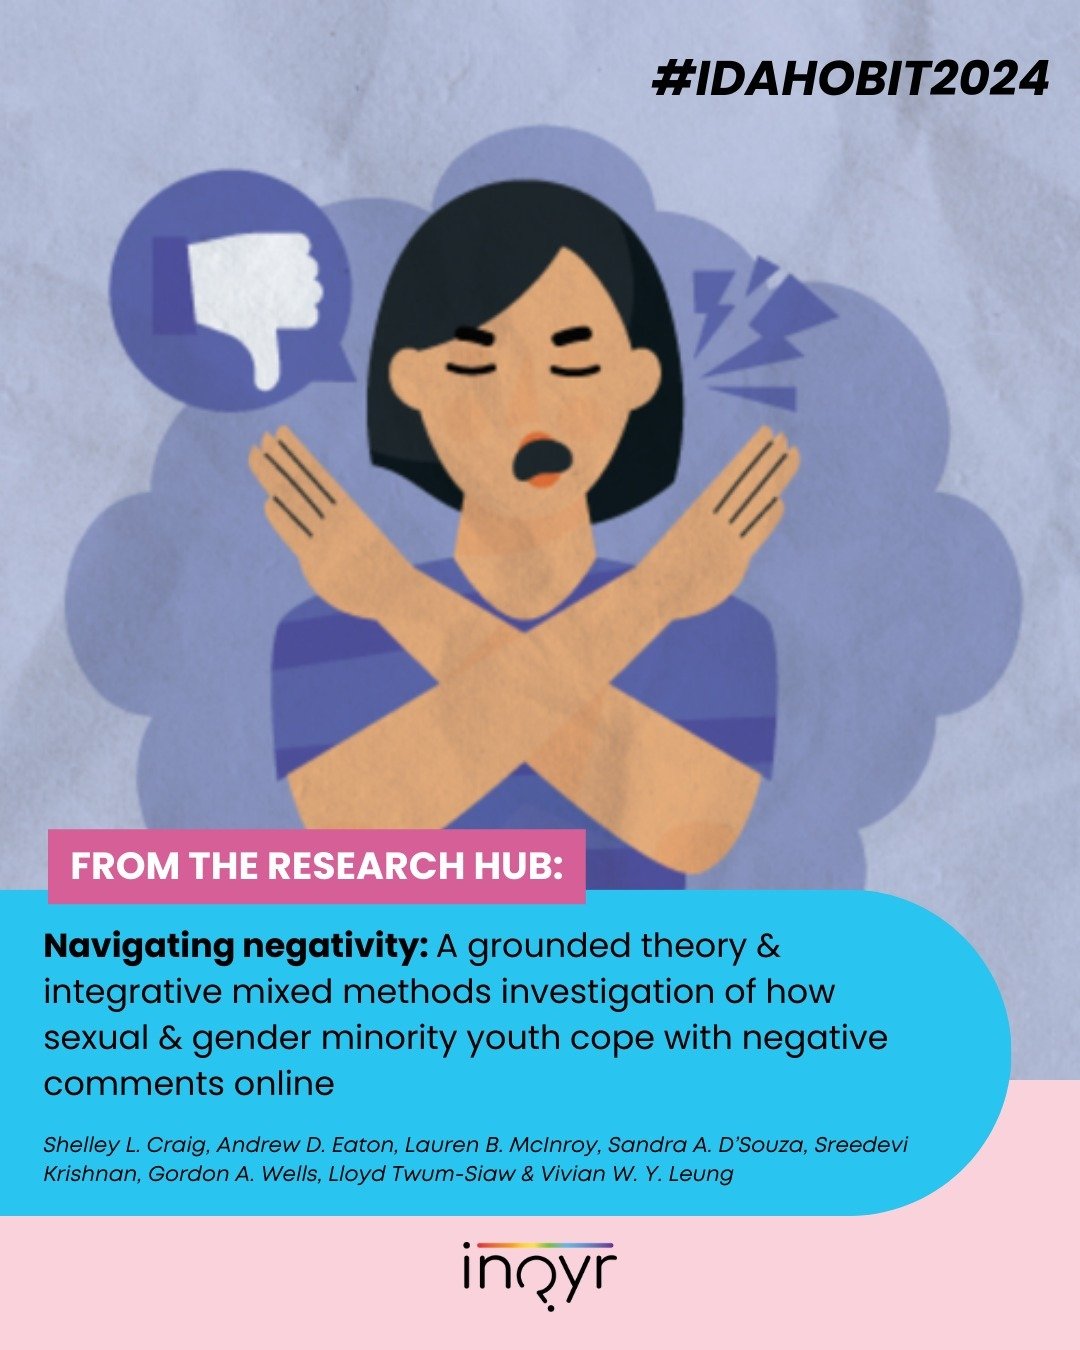 For #IDAHOBIT2024, we're sharing our research paper on LGBTQ+ youth navigating negativity online. Experiences of homophobia, biphobia, and transphobia take place online, and this study aimed to understand how youth resist these stressors on the Inter